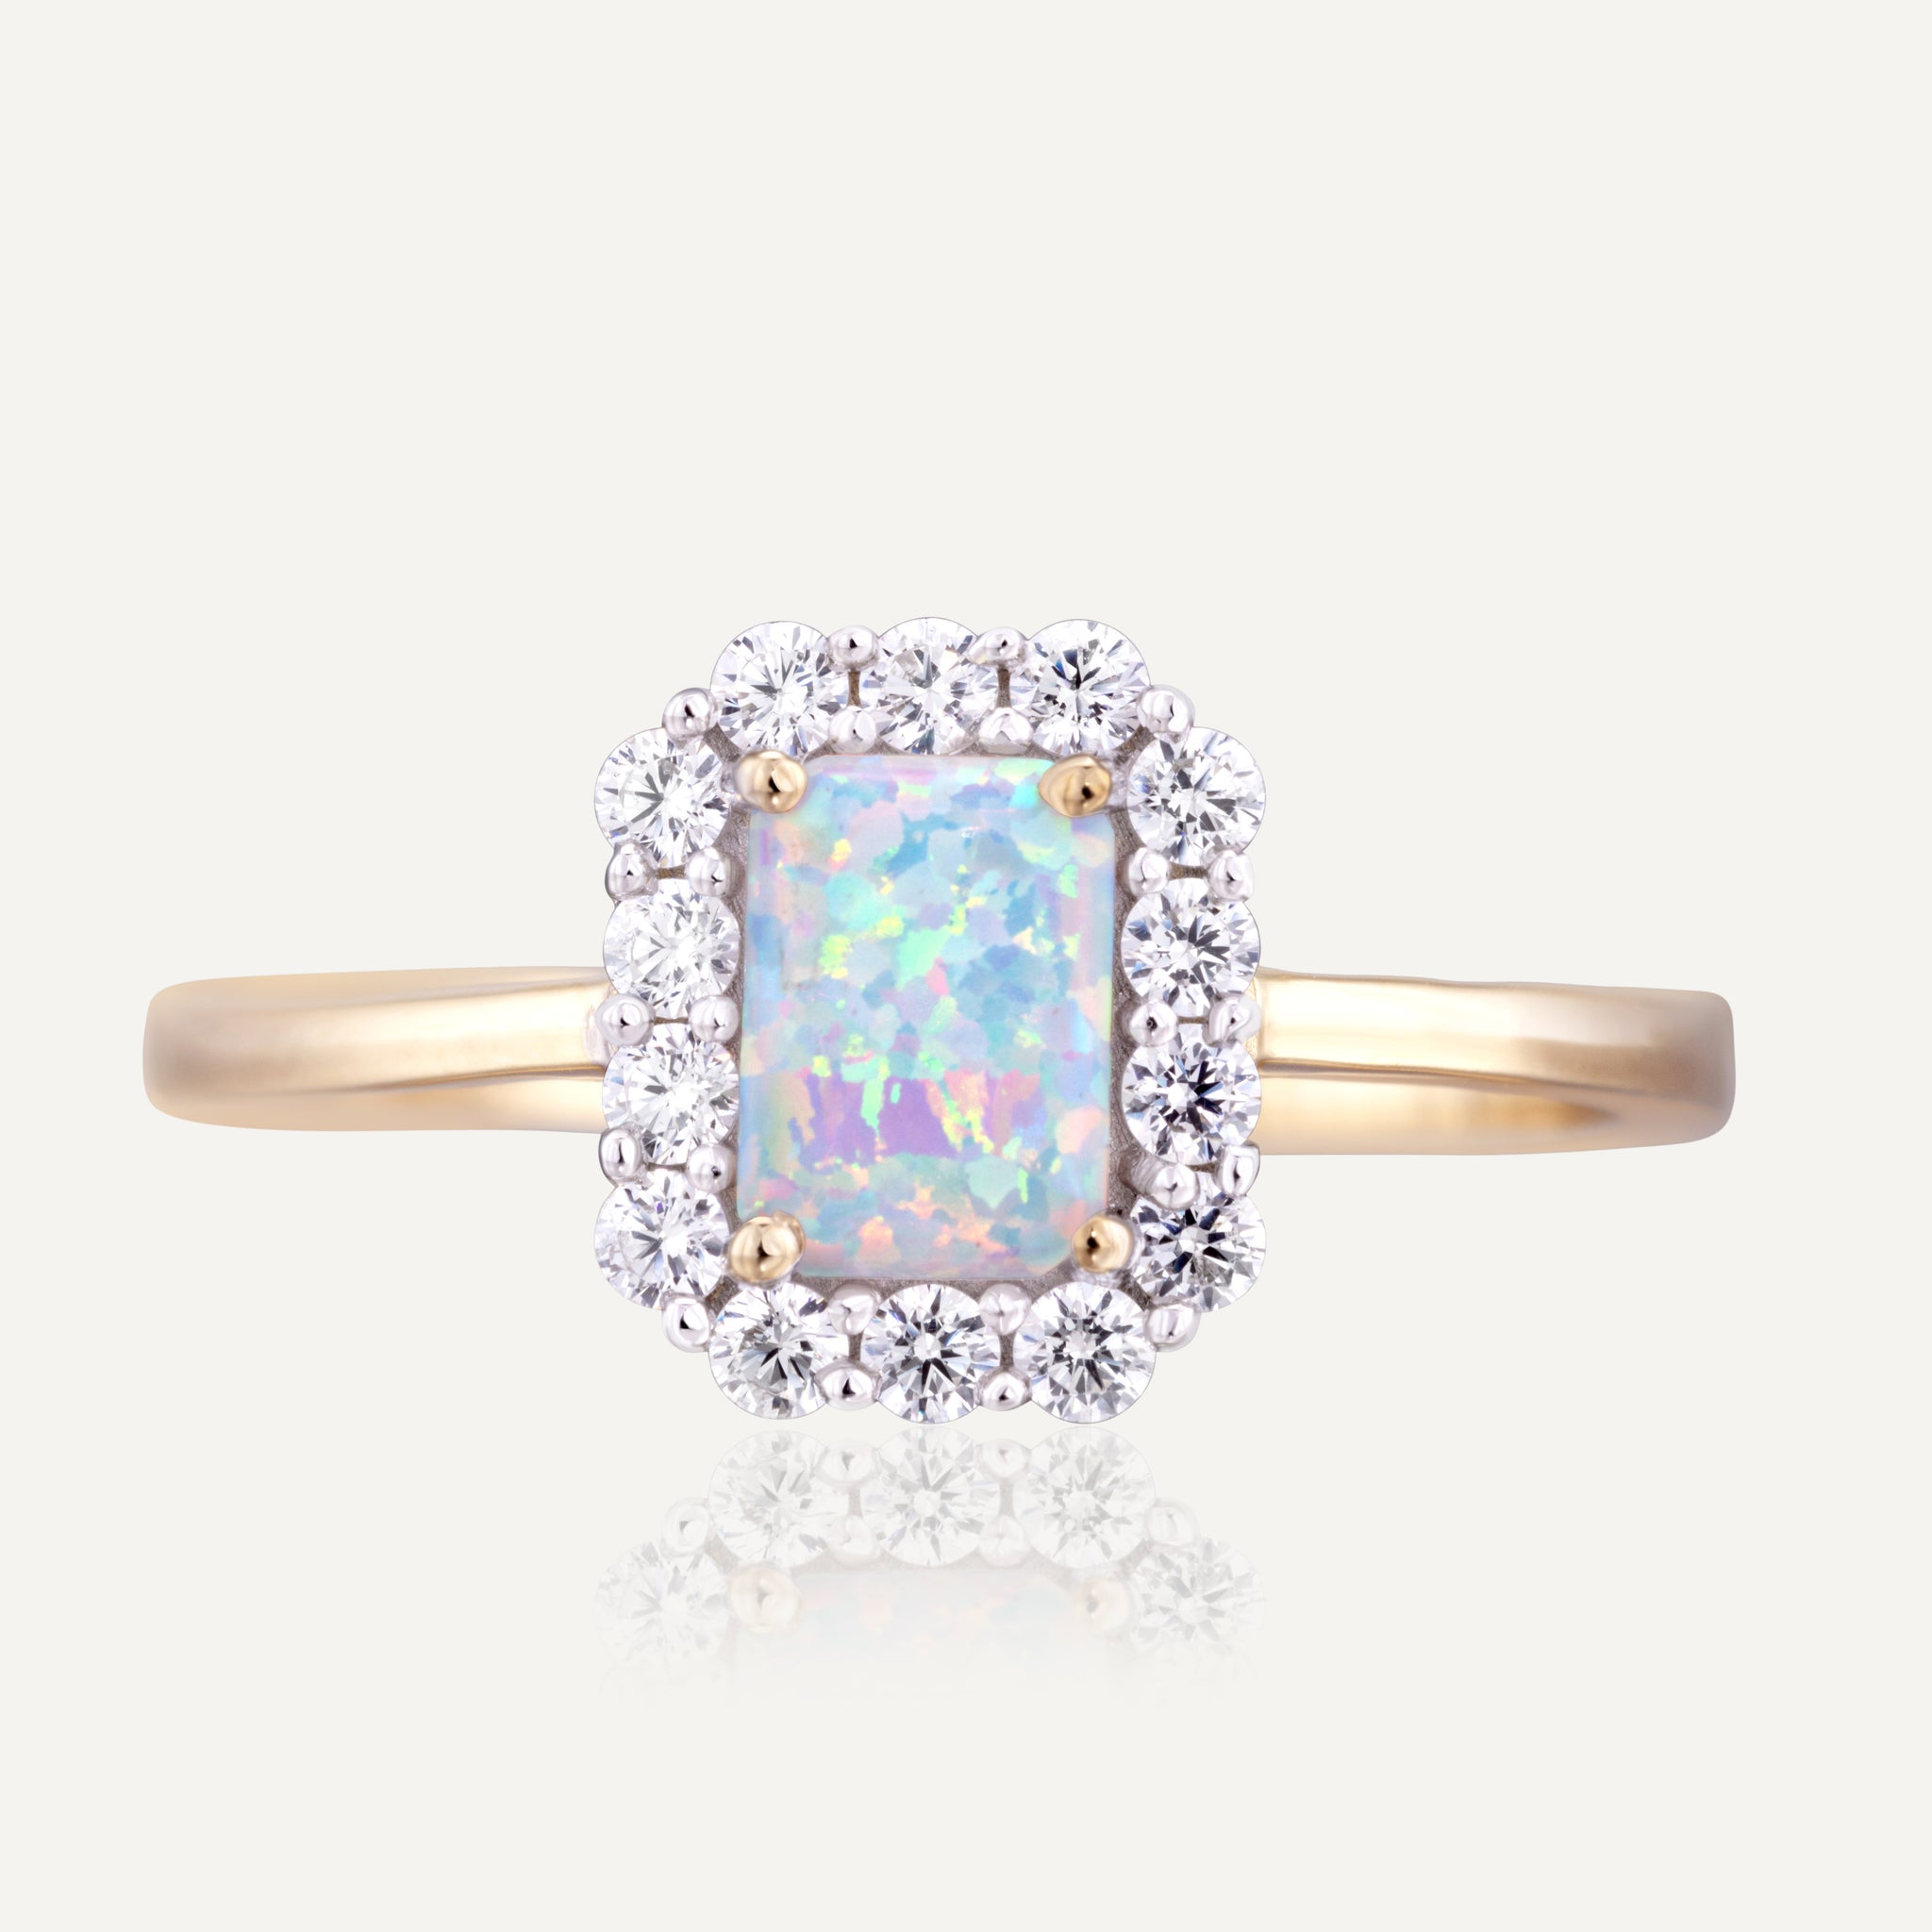 9ct Yellow Gold Opal Halo Ring.